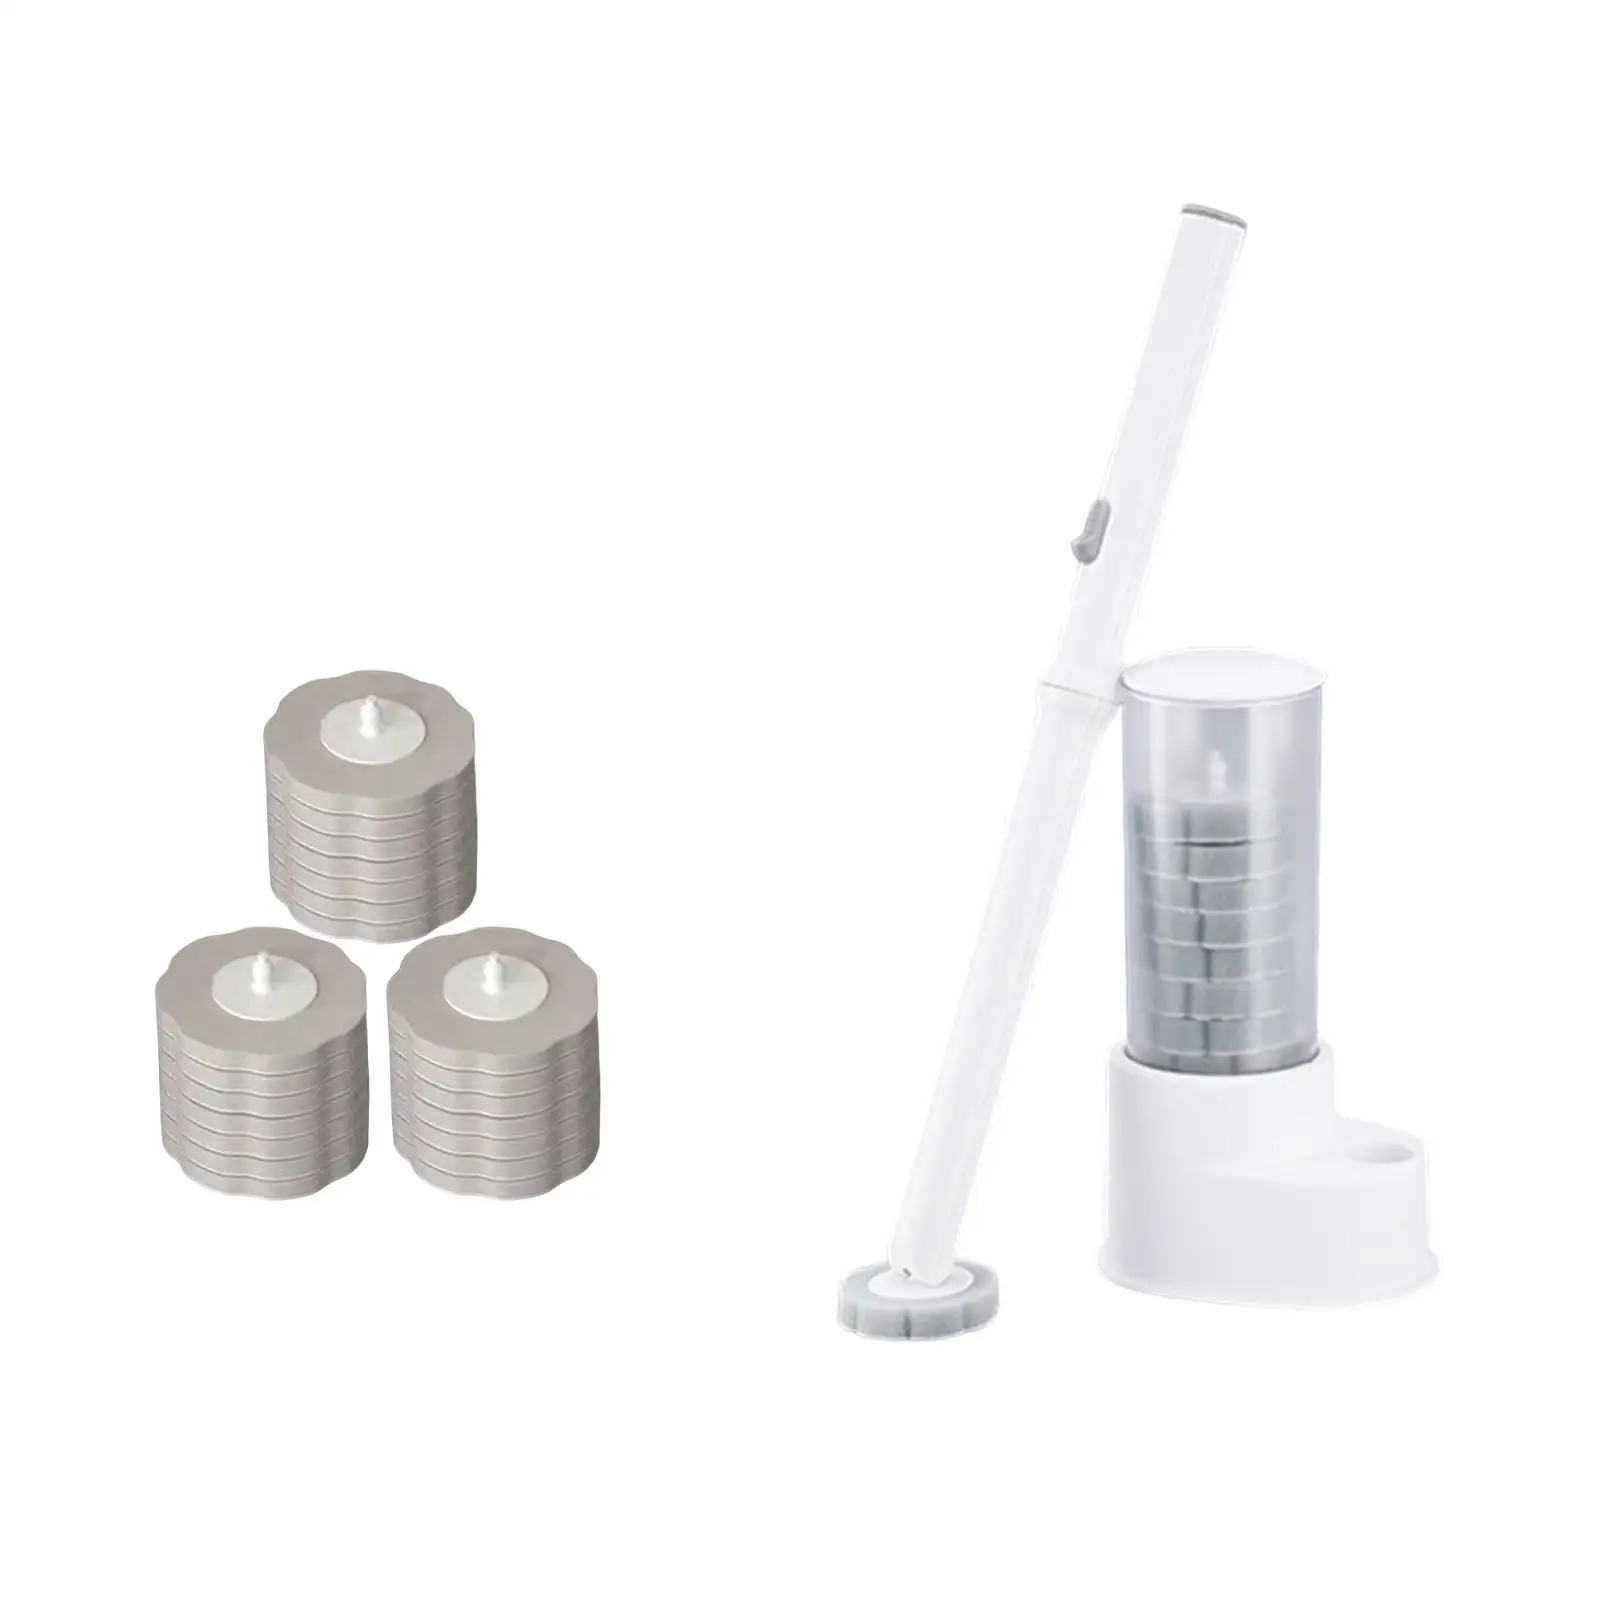 Replacable Toilet Cleaning Scrubber Set with Cleaning Liquid Cleaning Toilet Brush for Bathroom